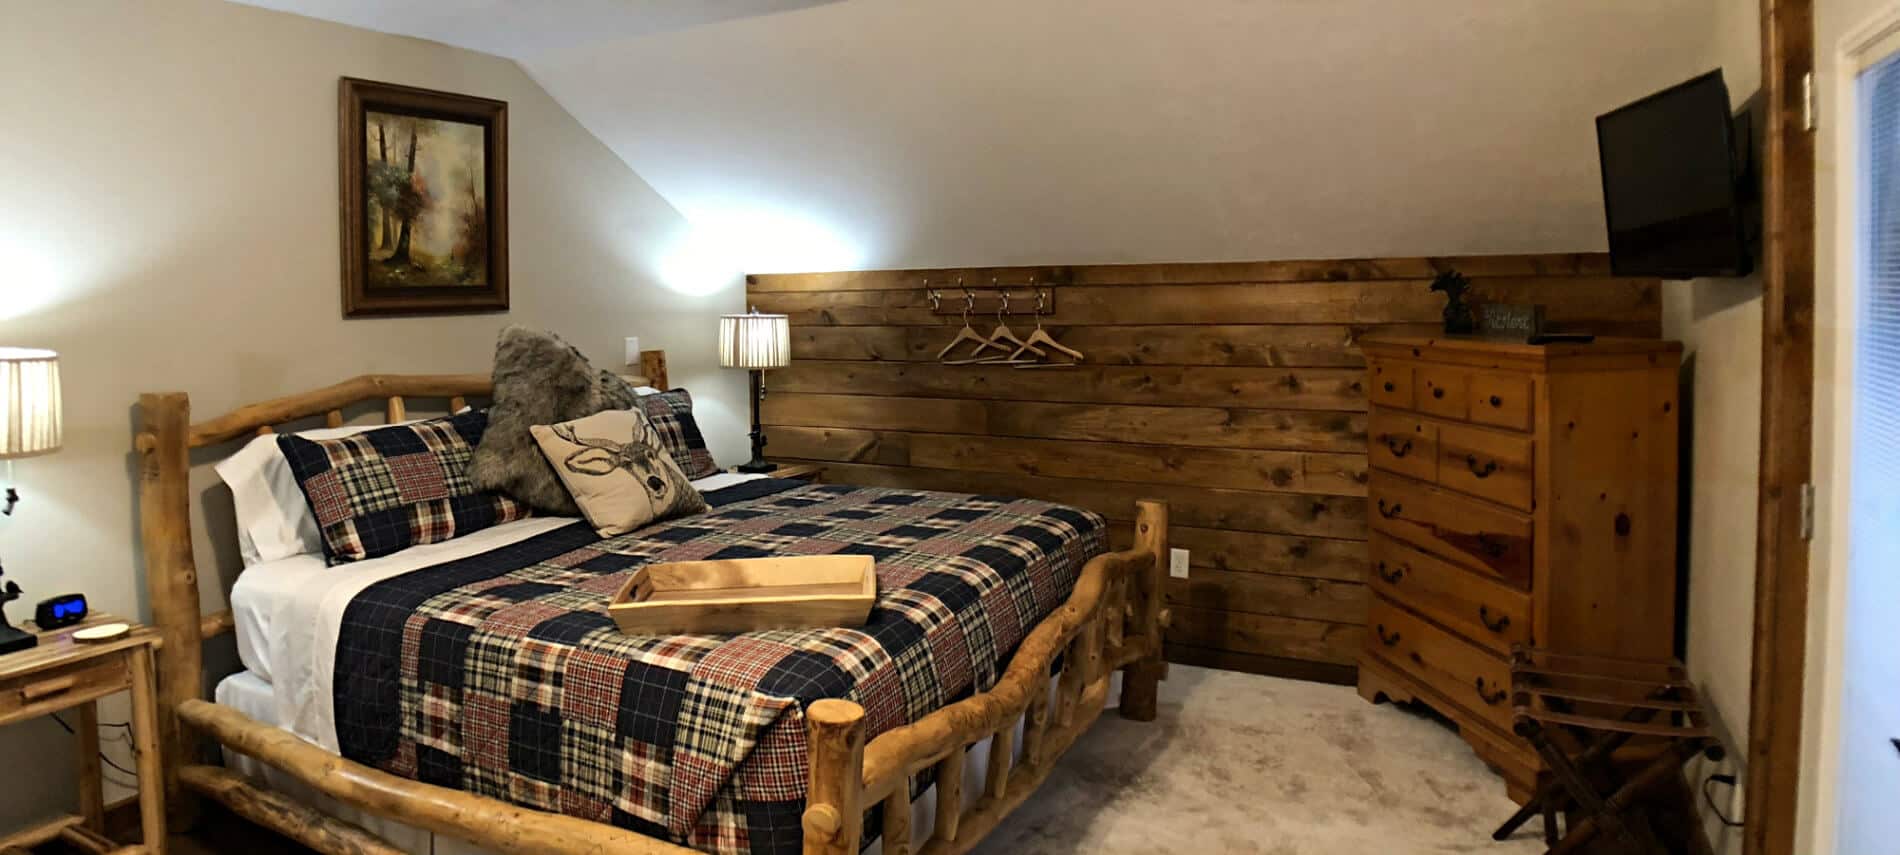 Walnut guest room with sloped ceiling, short plank wall, rustic bed with plaid bedding, and TV